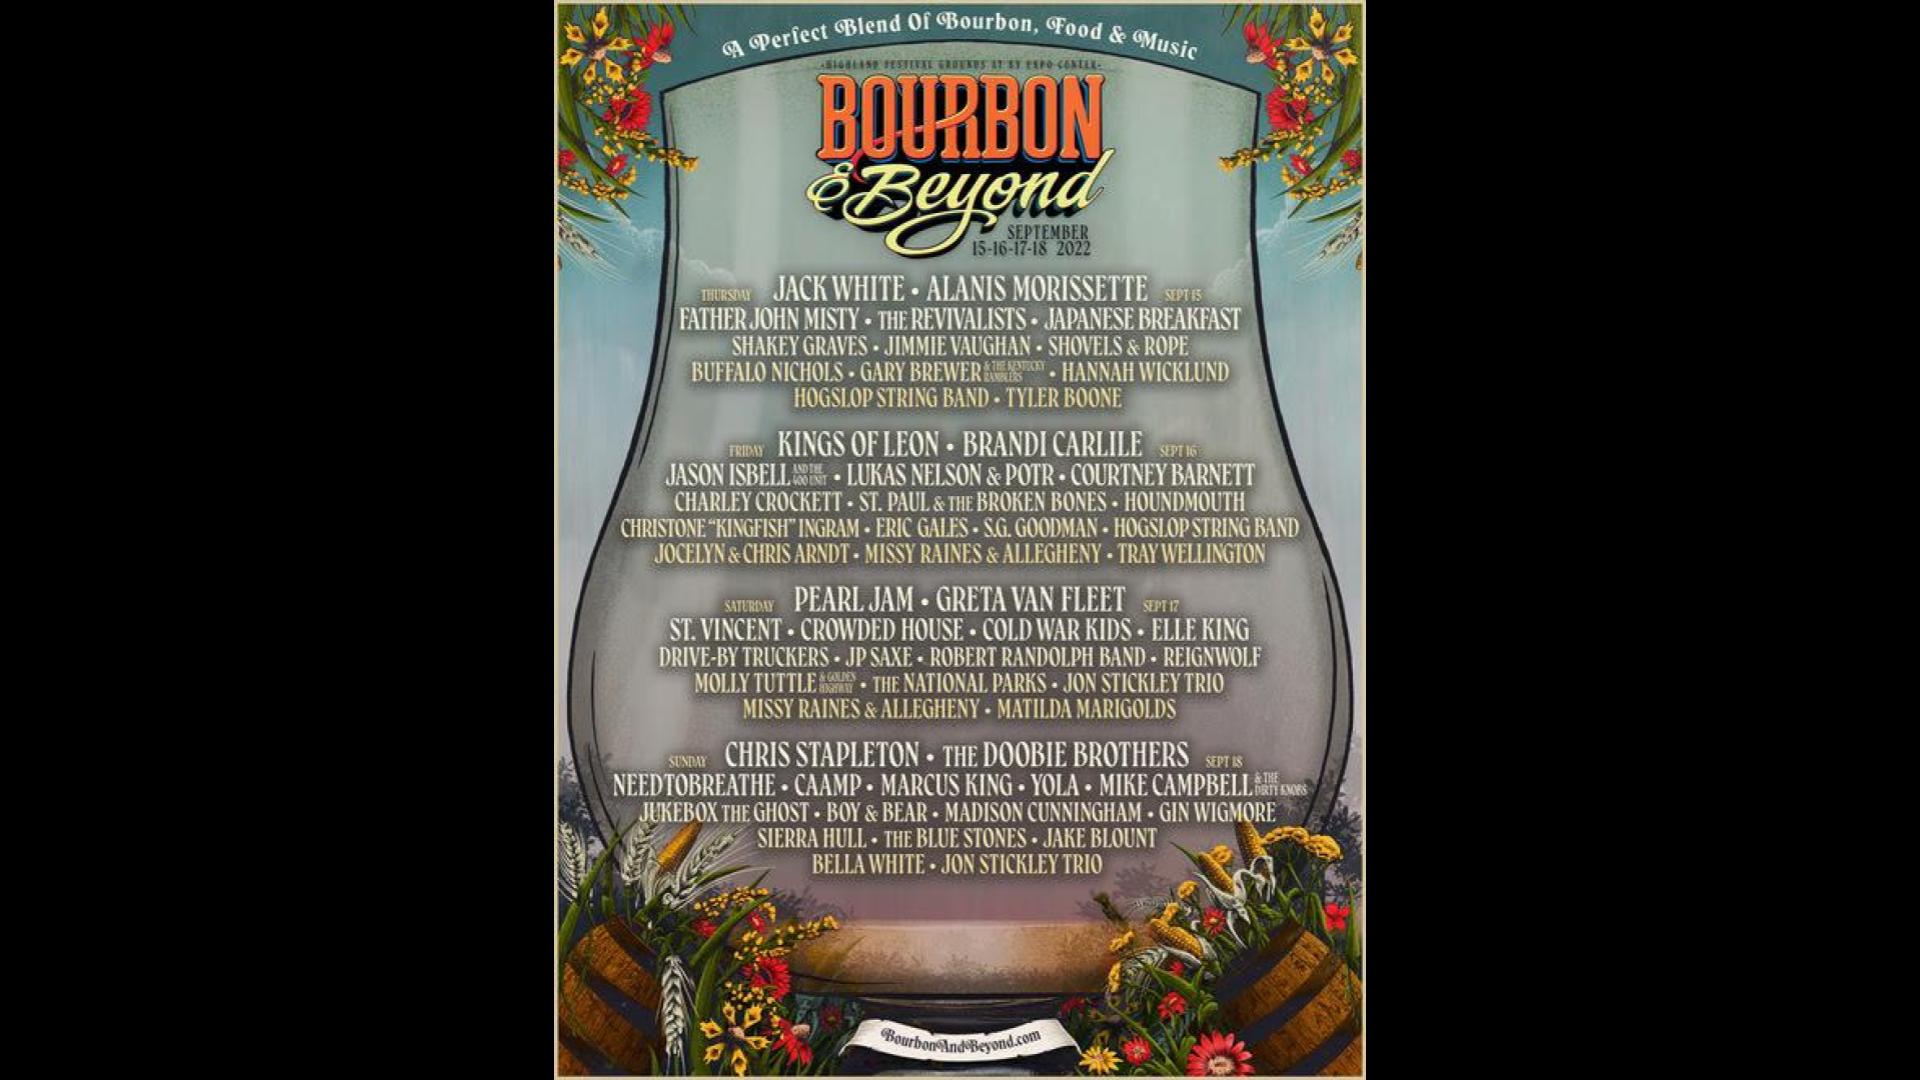 Bourbon and Beyond lineup festival passes on sale now WNKY News 40